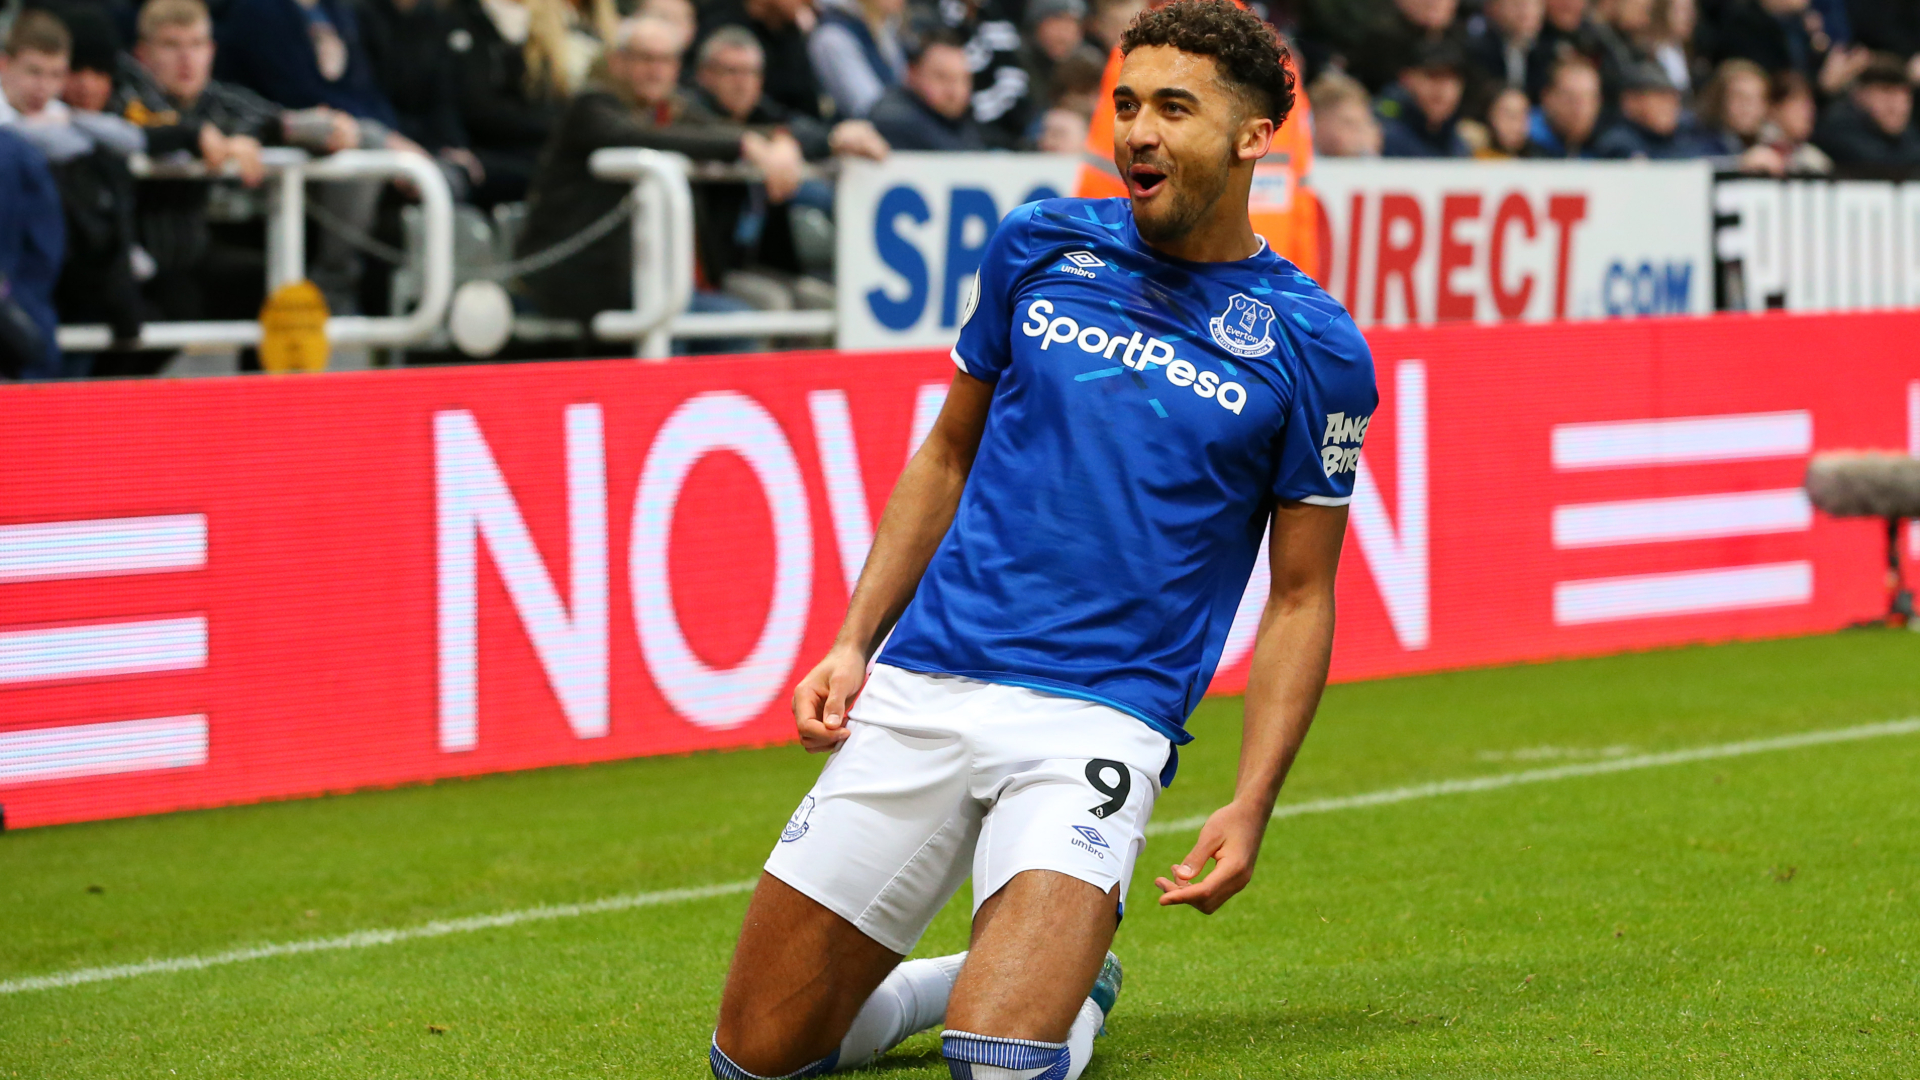 'Calvert-Lewin can be Everton and England's number nine' - Redknapp praises in-form Toffees striker